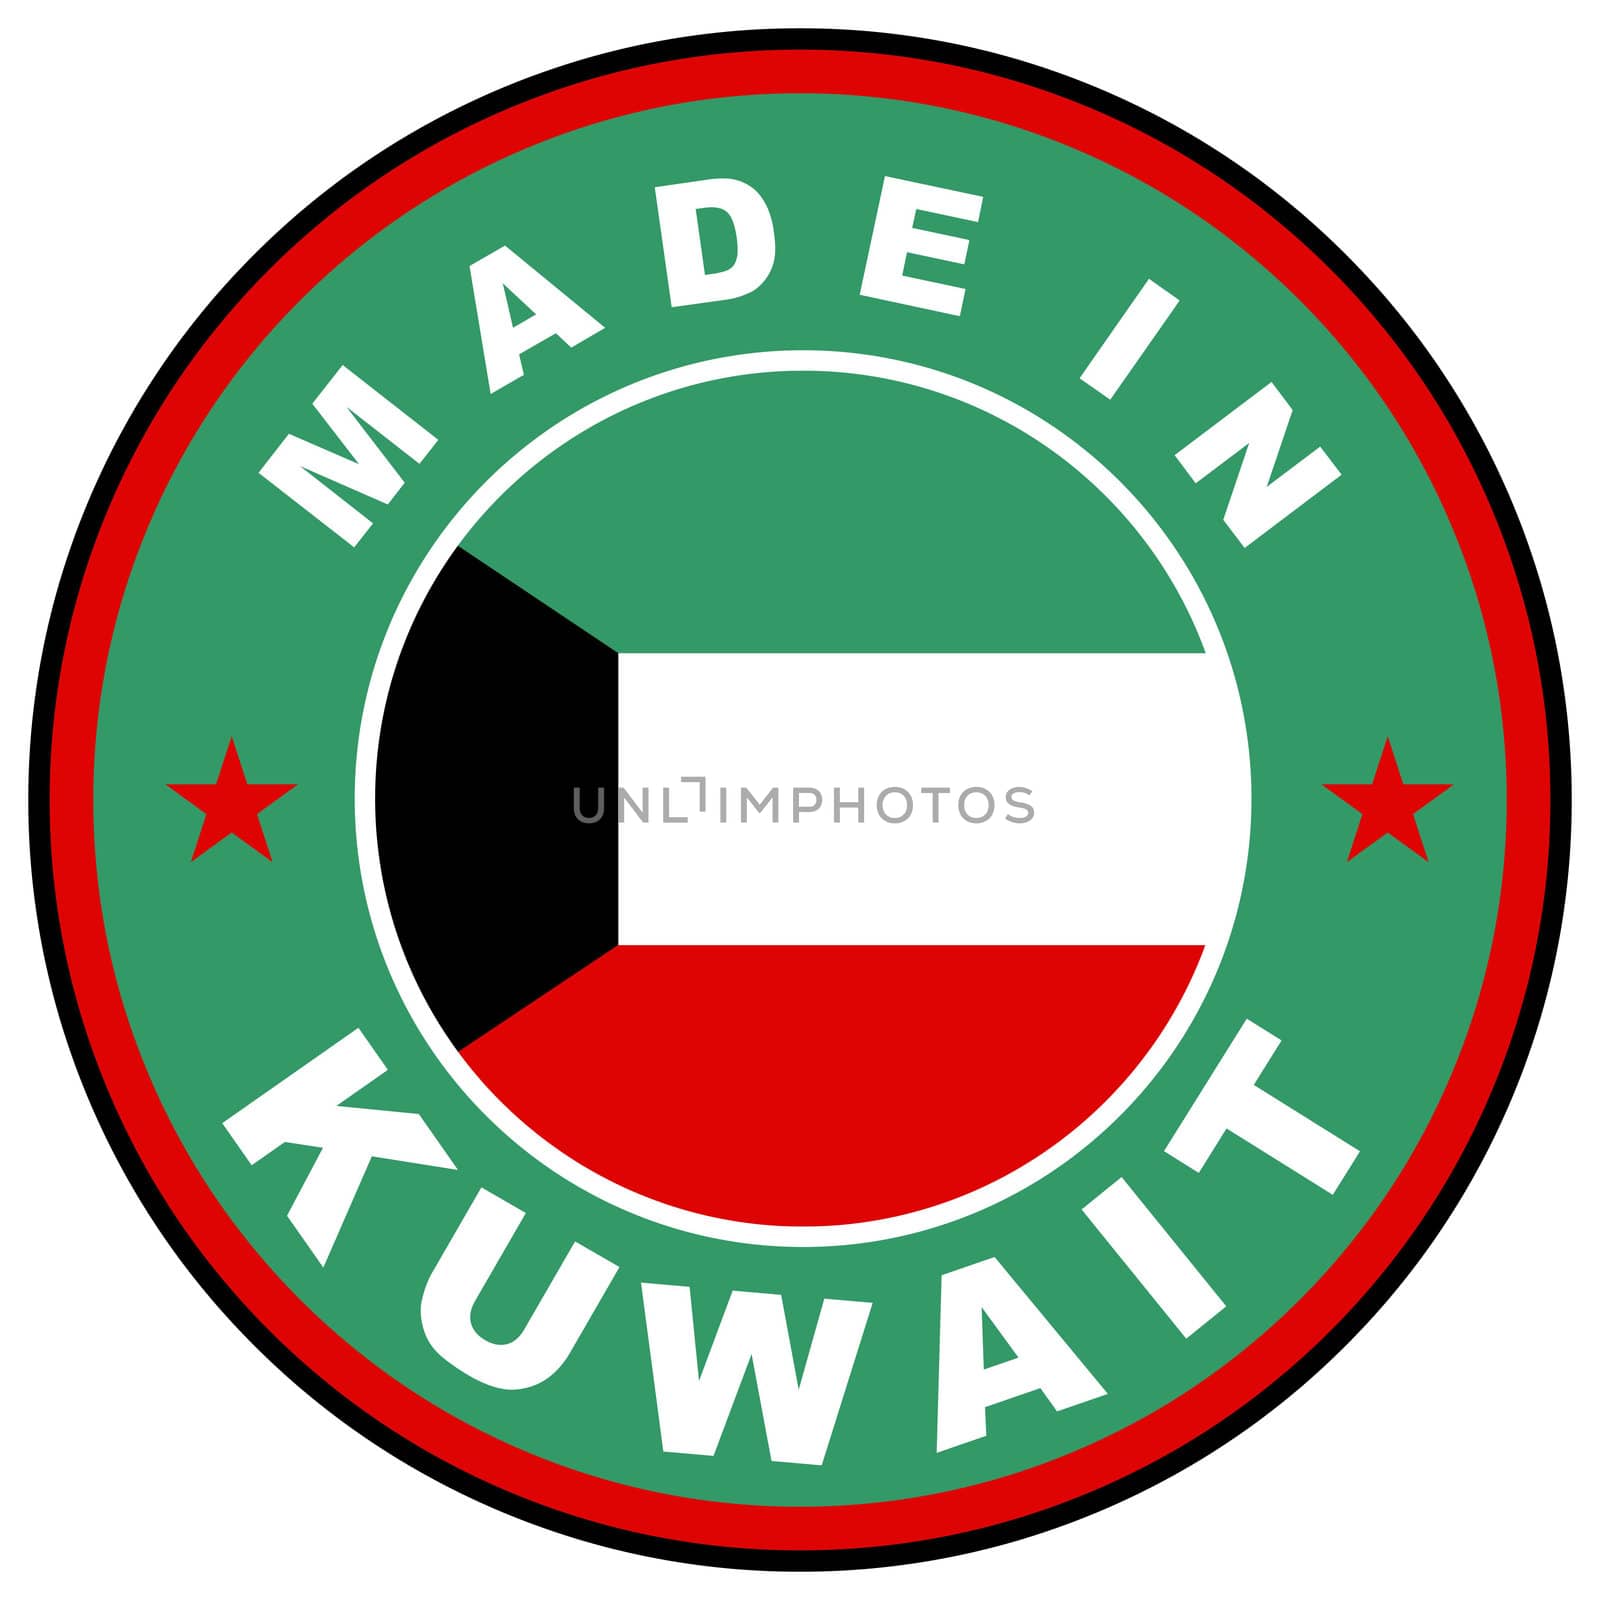 very big size made in kuwait country label